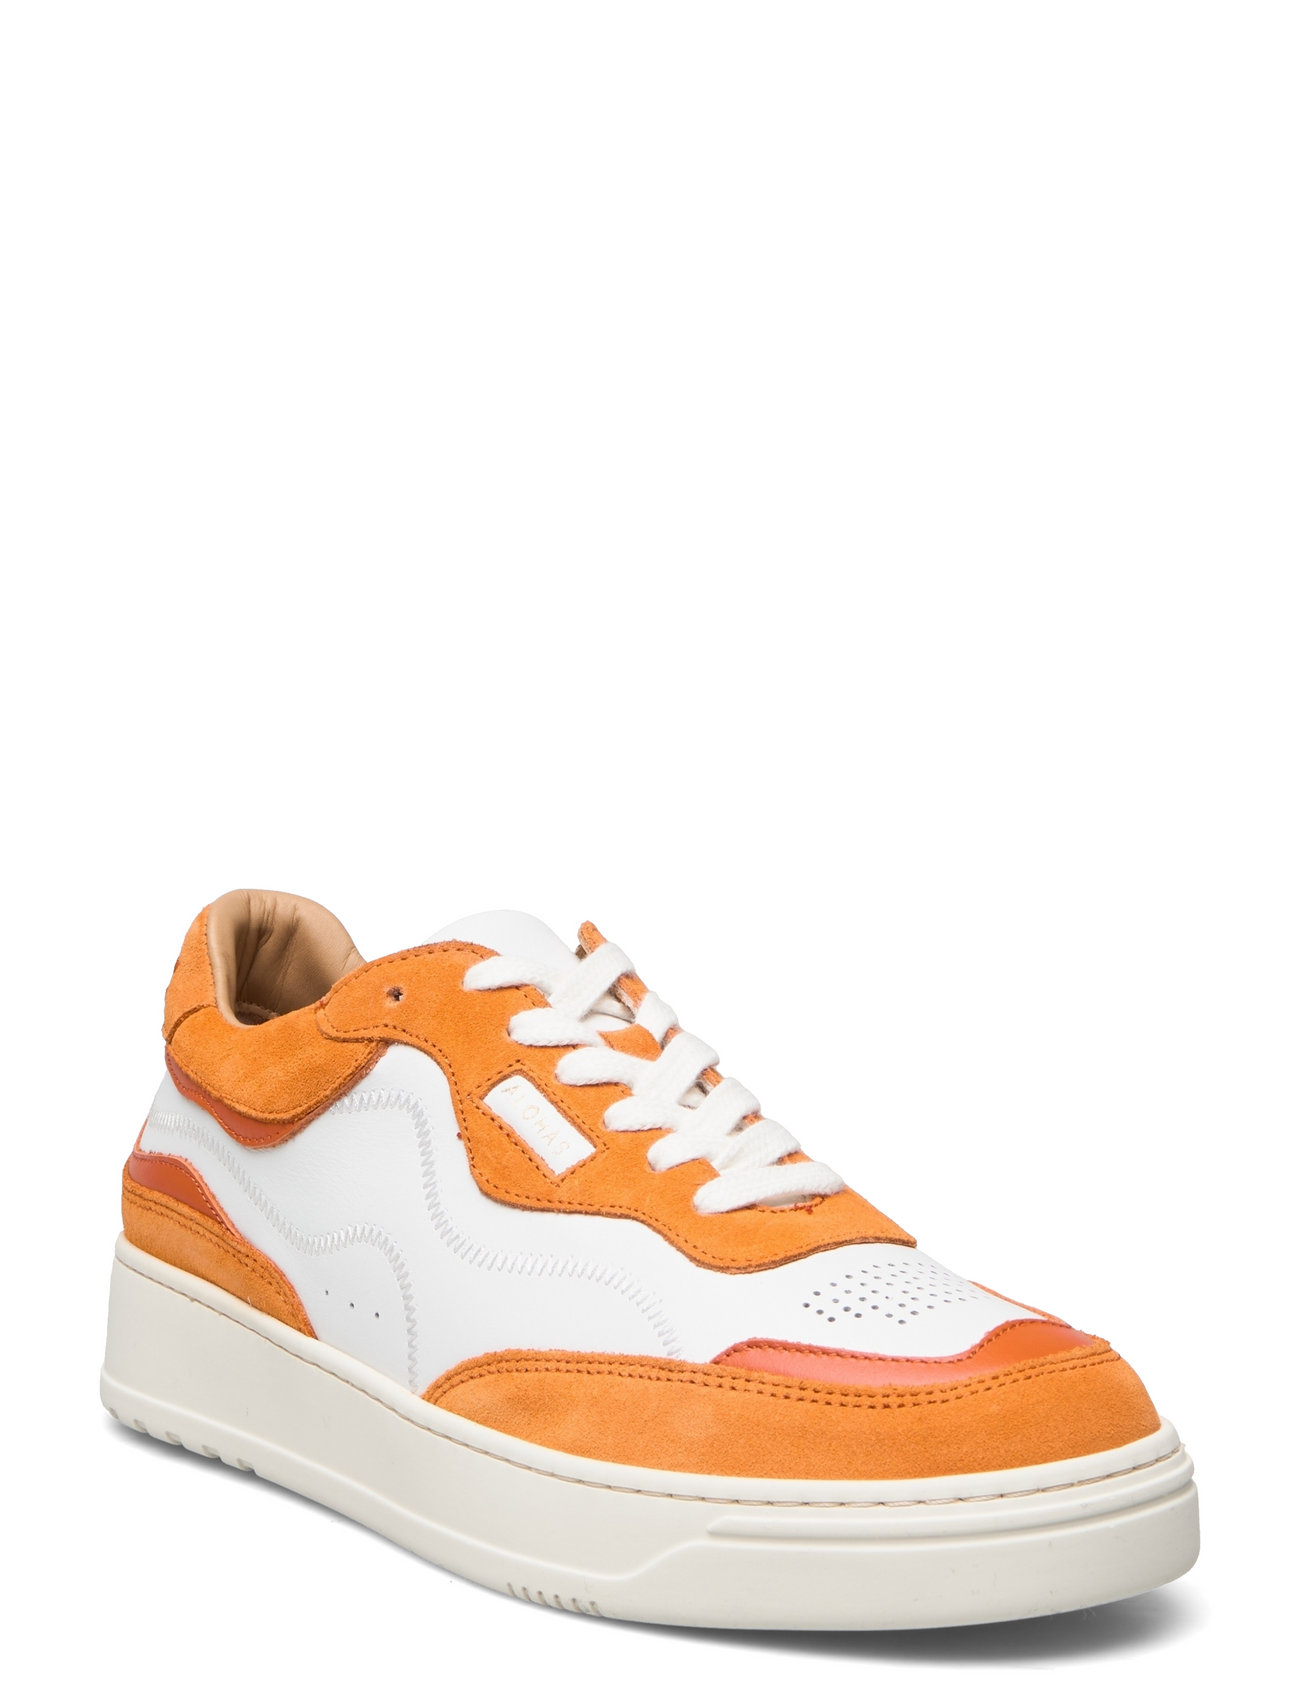 TB.87 - White and Orange Leather Sneakers